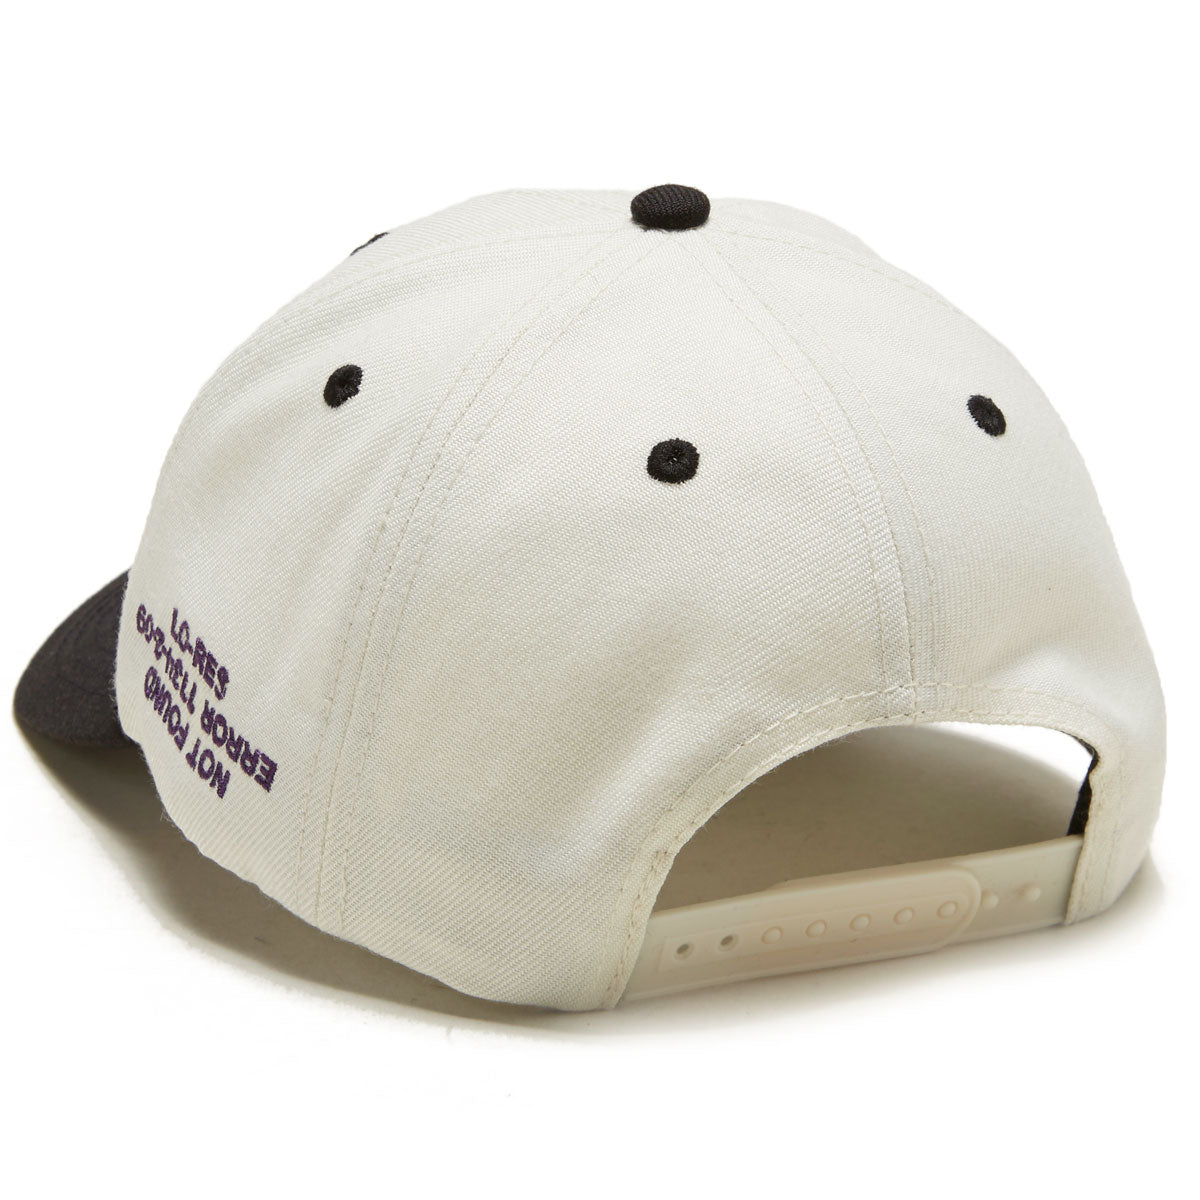 Lo-Res Ball Hat - Off White image 2